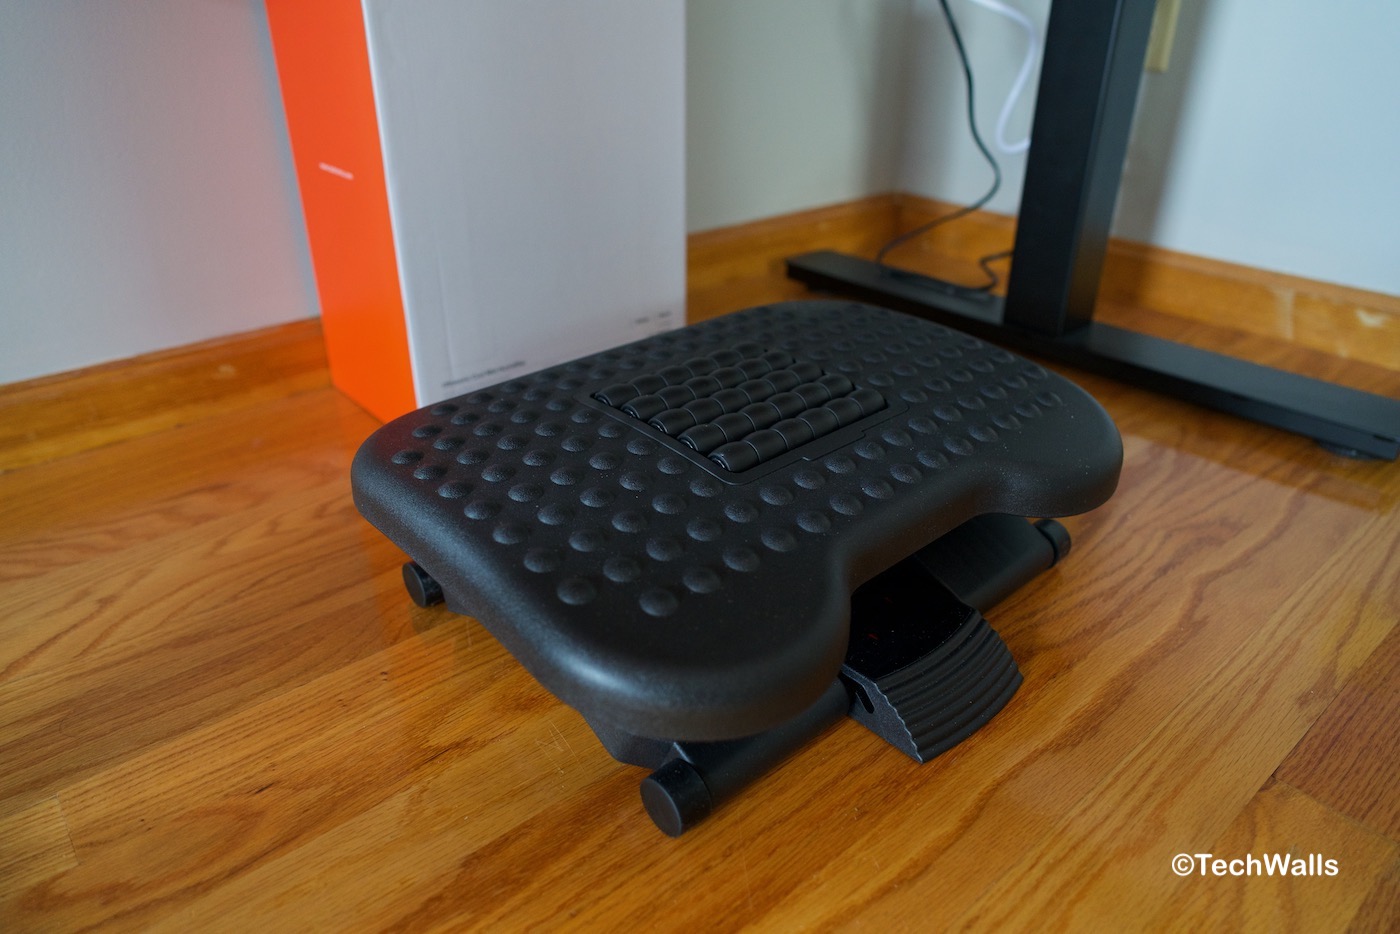 Footrest Under Desk With Massage Texture And Roller